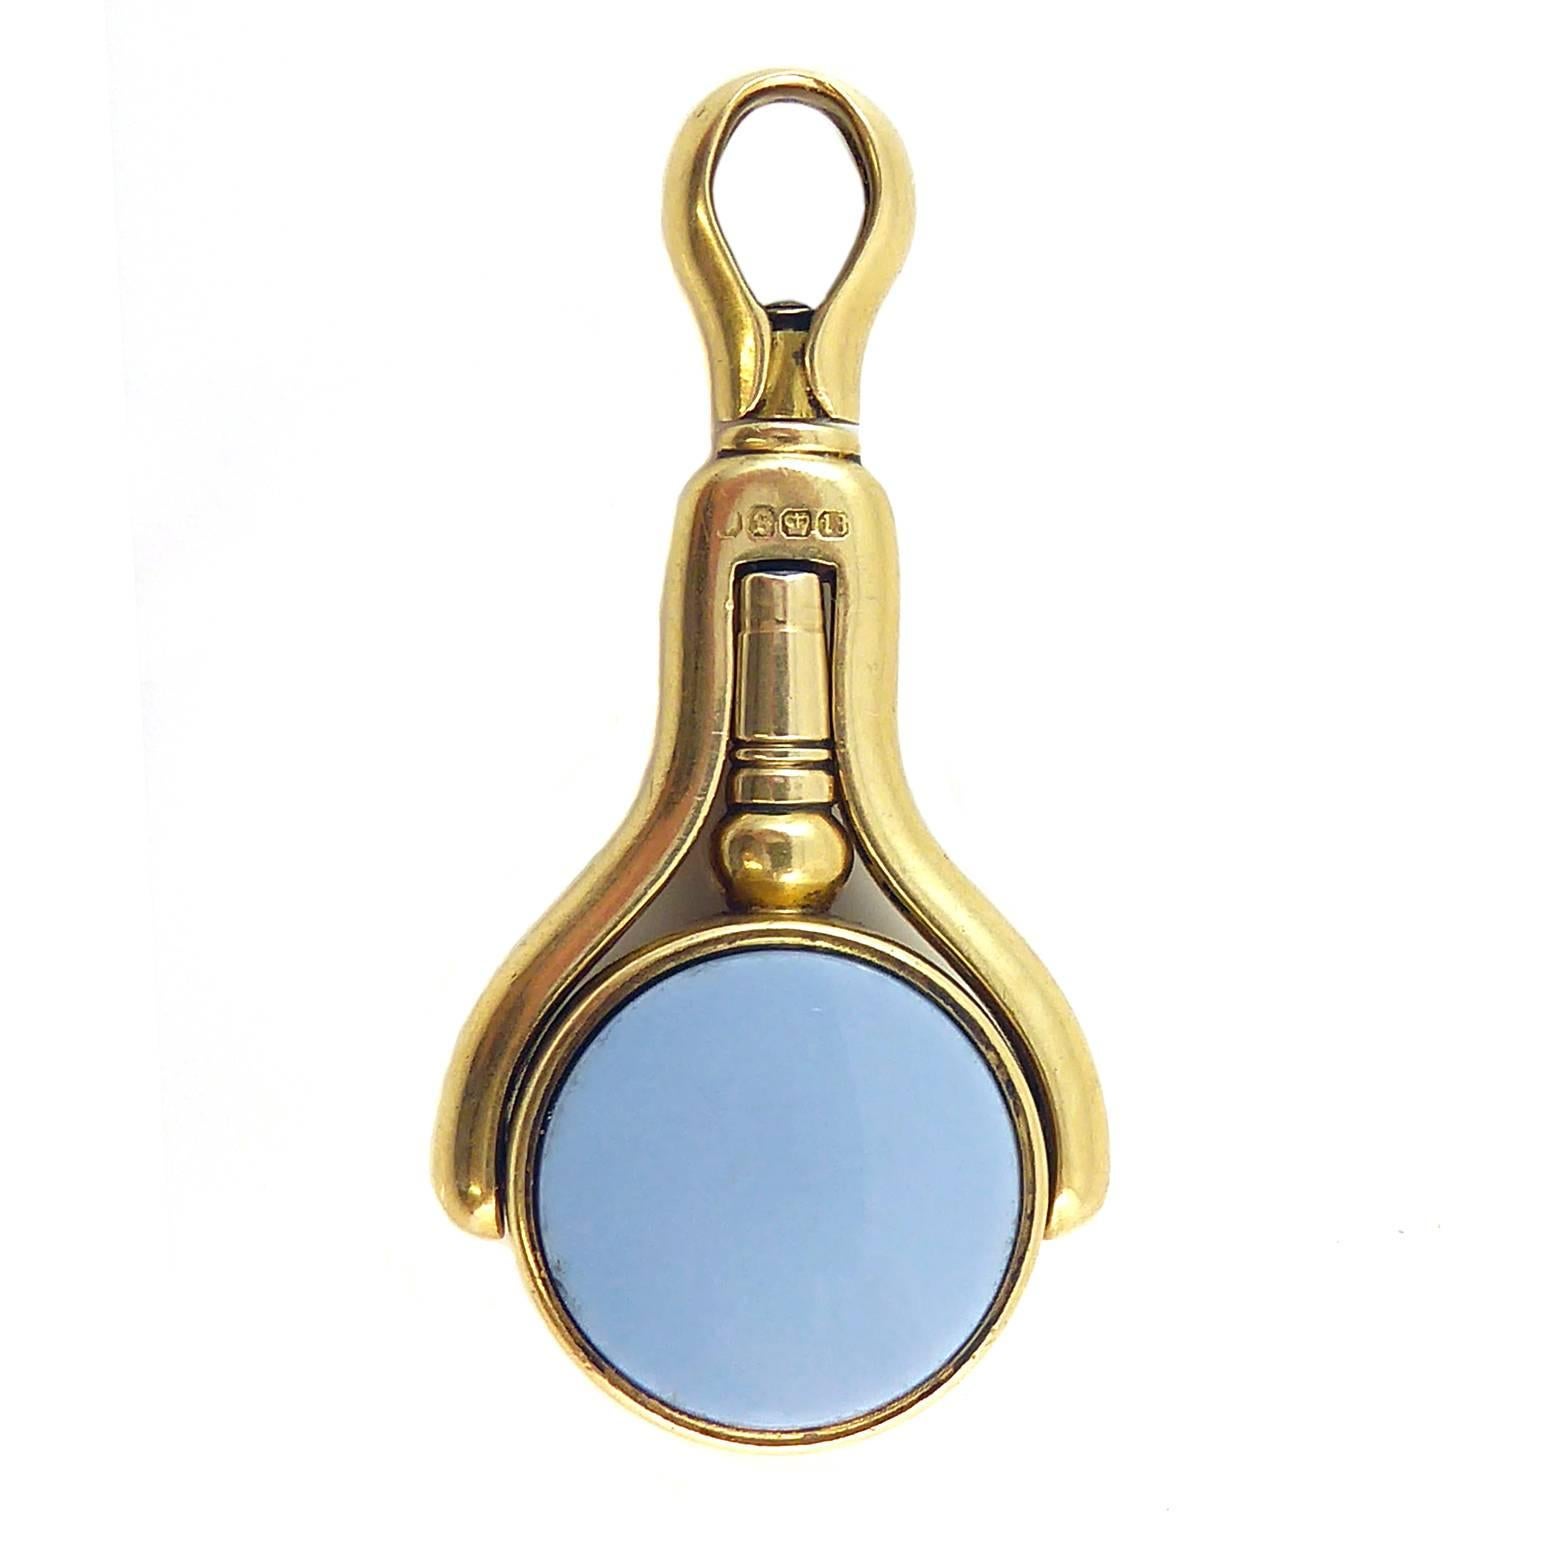 Details
1 x sardonyx
1 x bloodstone
Each approx.  16mm diamenter
18ct yellow gold

Victorian pocket watch seal fob set with a chamfered edge blood stone and sardonyx in an 18ct gold band.  The fob is attached to a gold frame within which it swivels